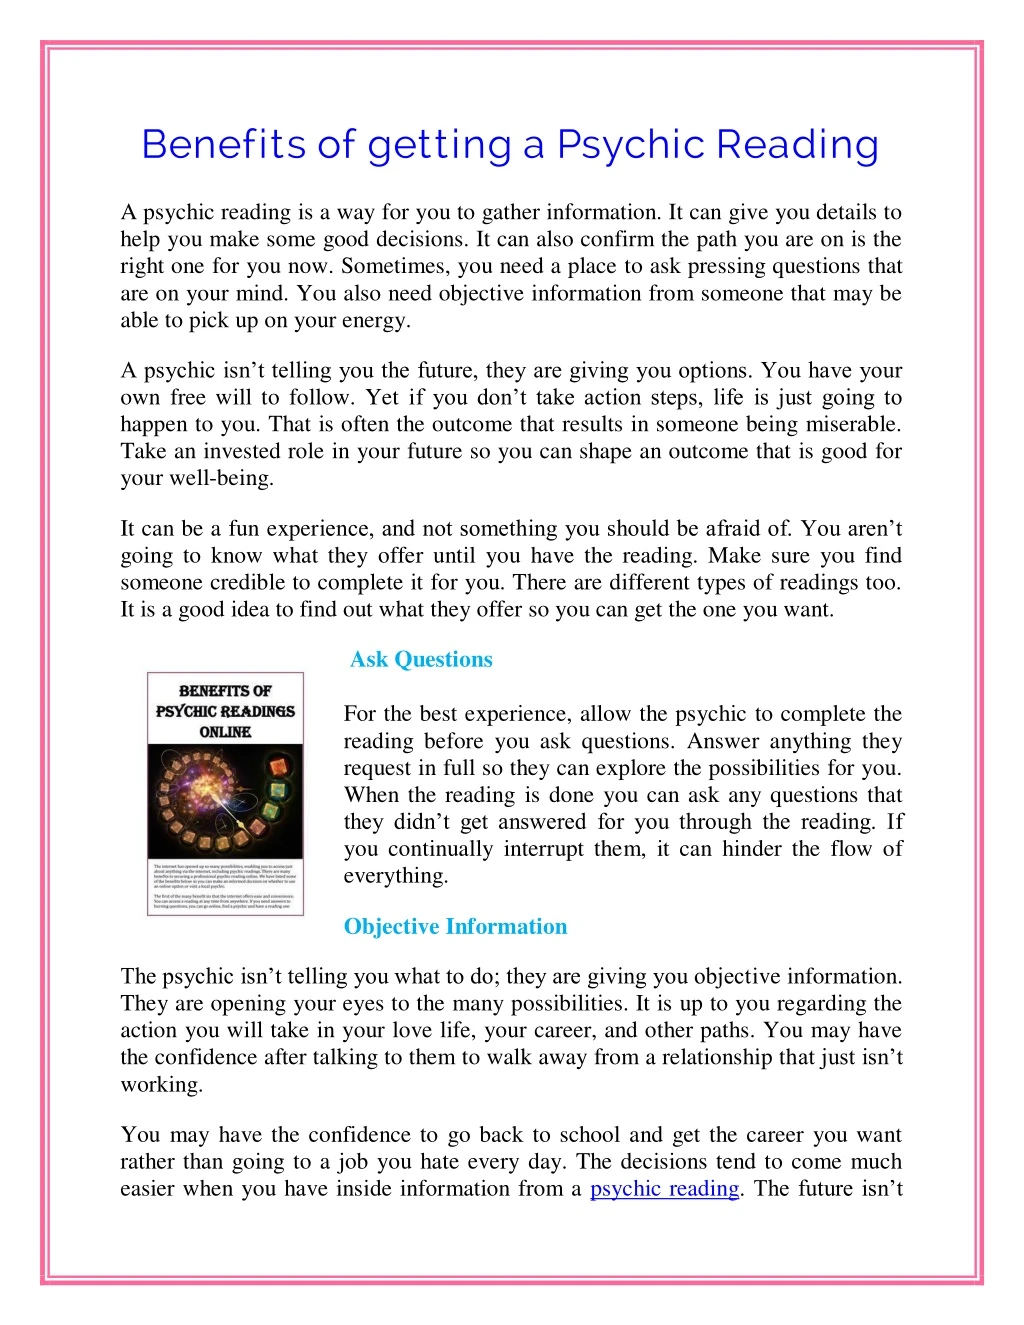 benefits of getting a psychic reading